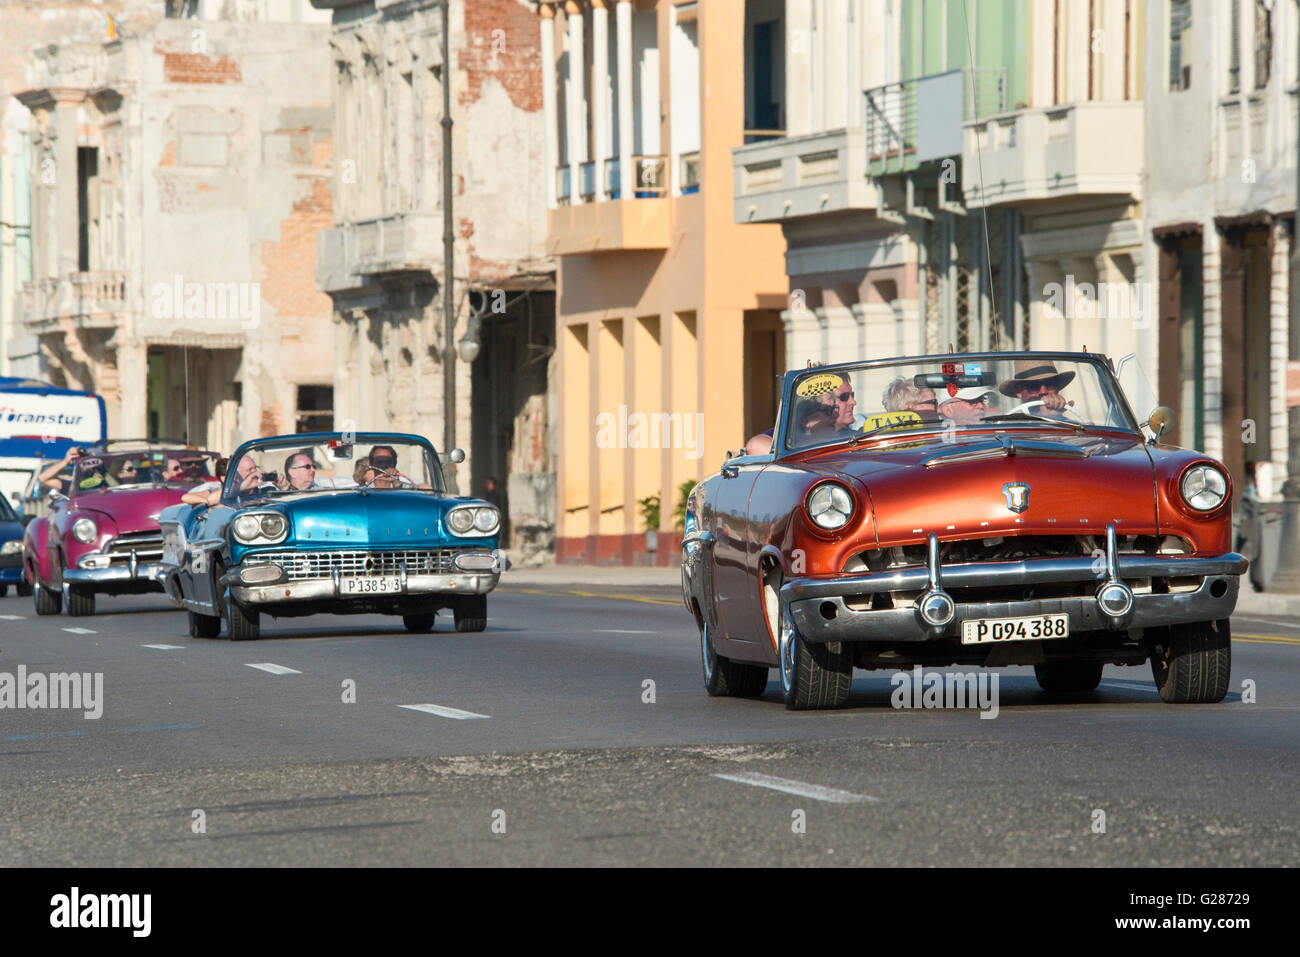 A 1958 Pontiac Super Chief (Blue Car) and a 1953 Mercury Monterey (Red/Brown Car) along the Malecón in Havana, Cuba. Stock Photo